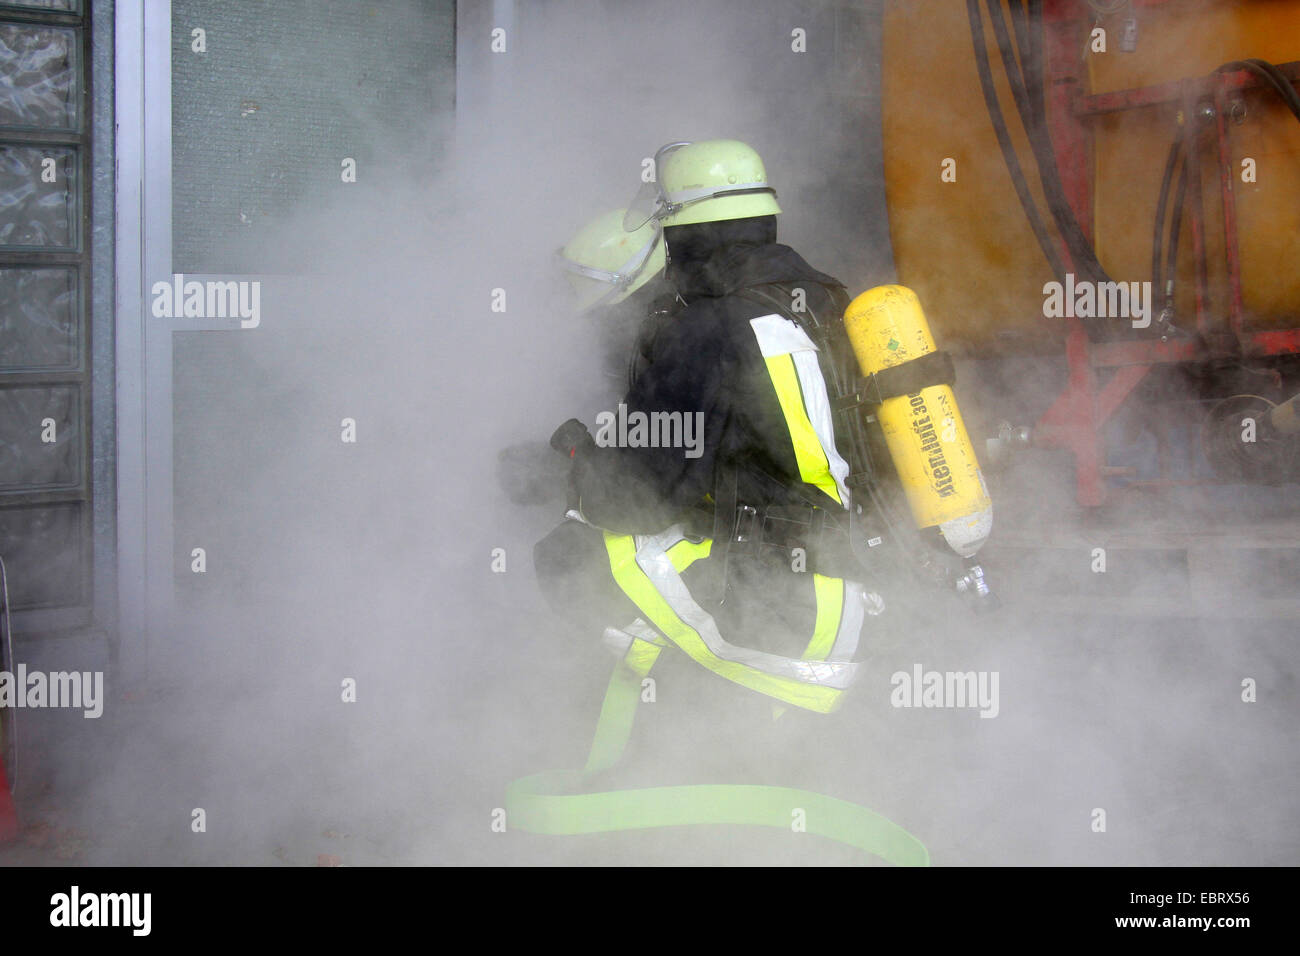 firefighting exercise with protective respiratory equipment, Germany Stock Photo